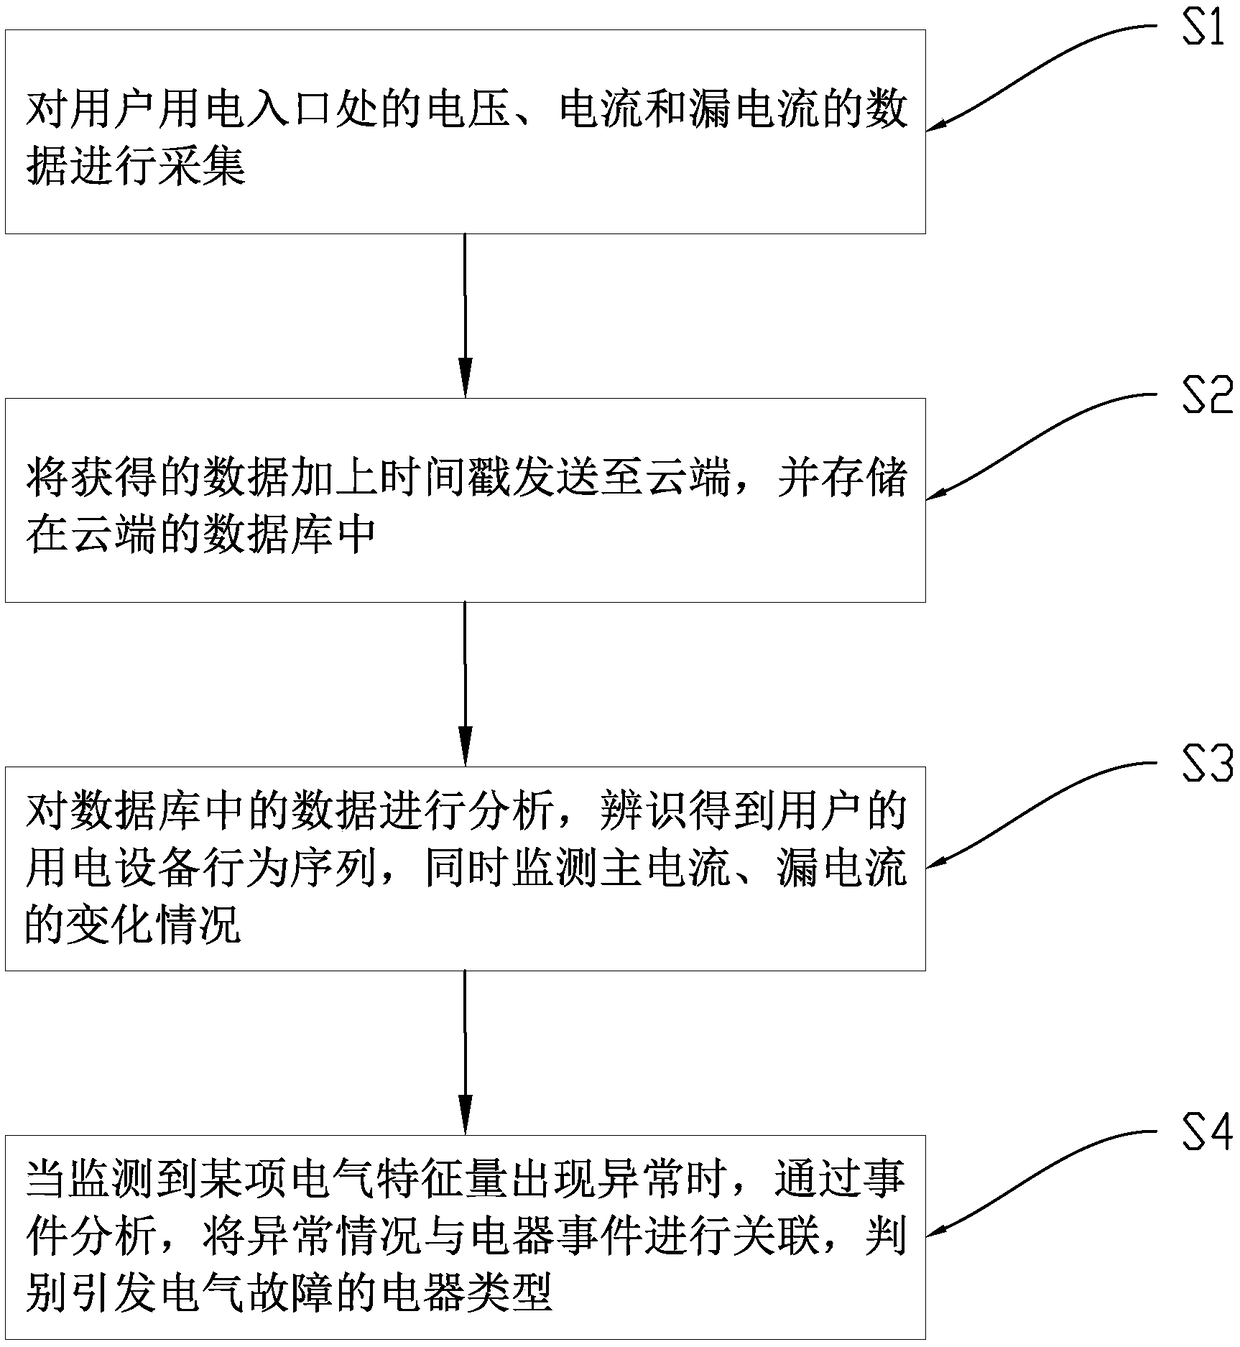 Non-intrusive user power consumption fault identification method and system thereof